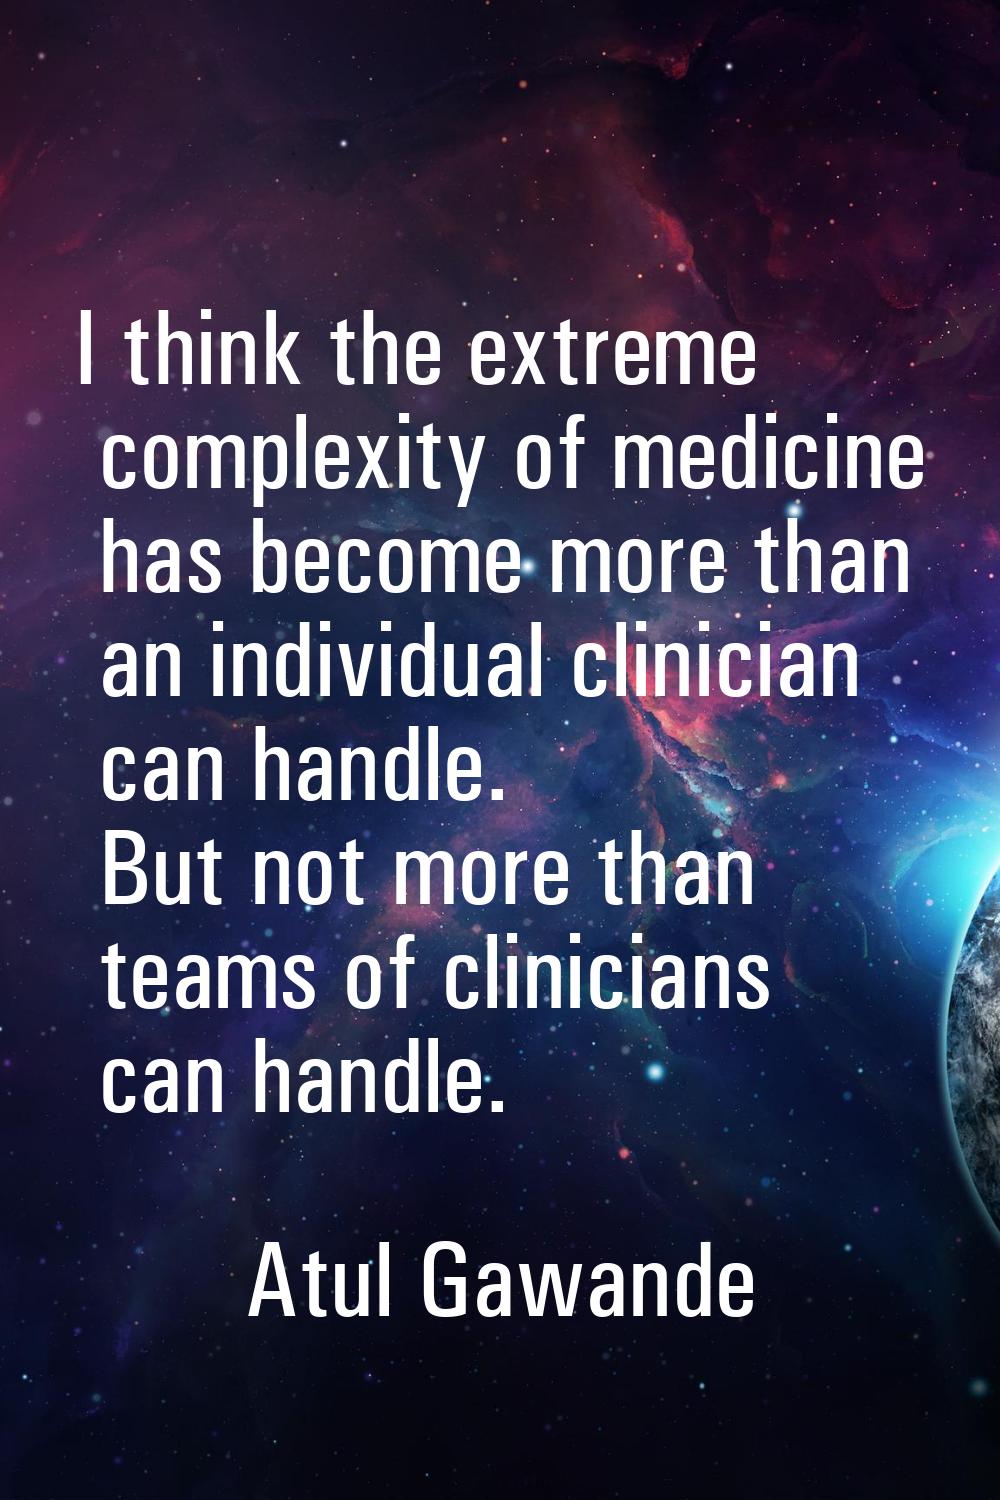 I think the extreme complexity of medicine has become more than an individual clinician can handle.